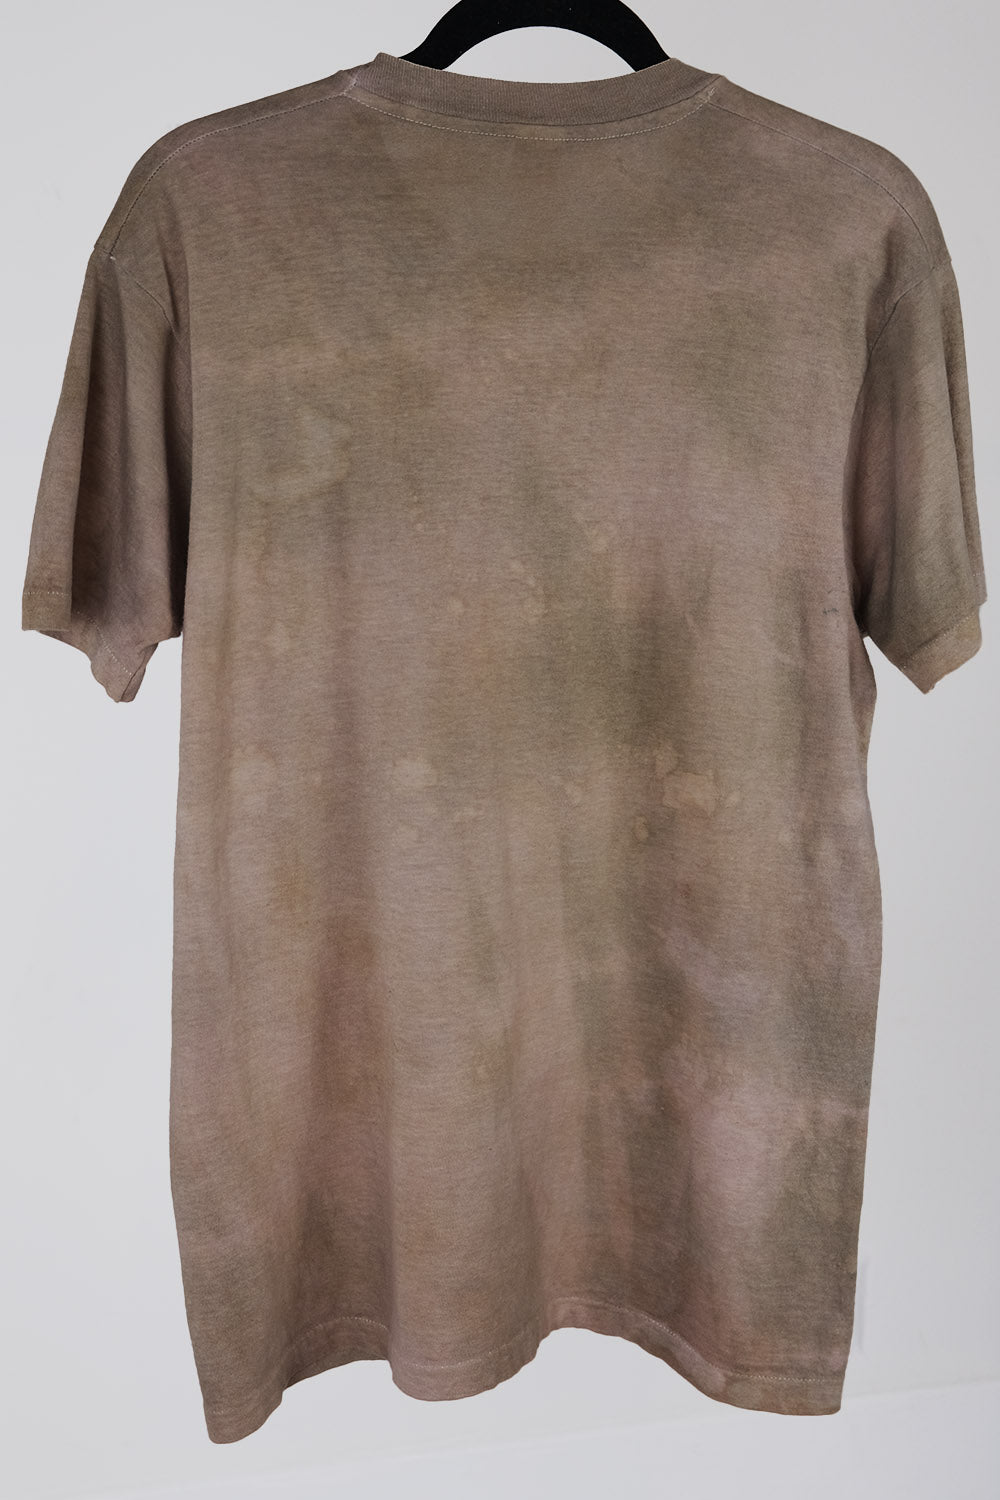 Snakebite Hand-Dyed Sepia Vintage Tee | In Stock